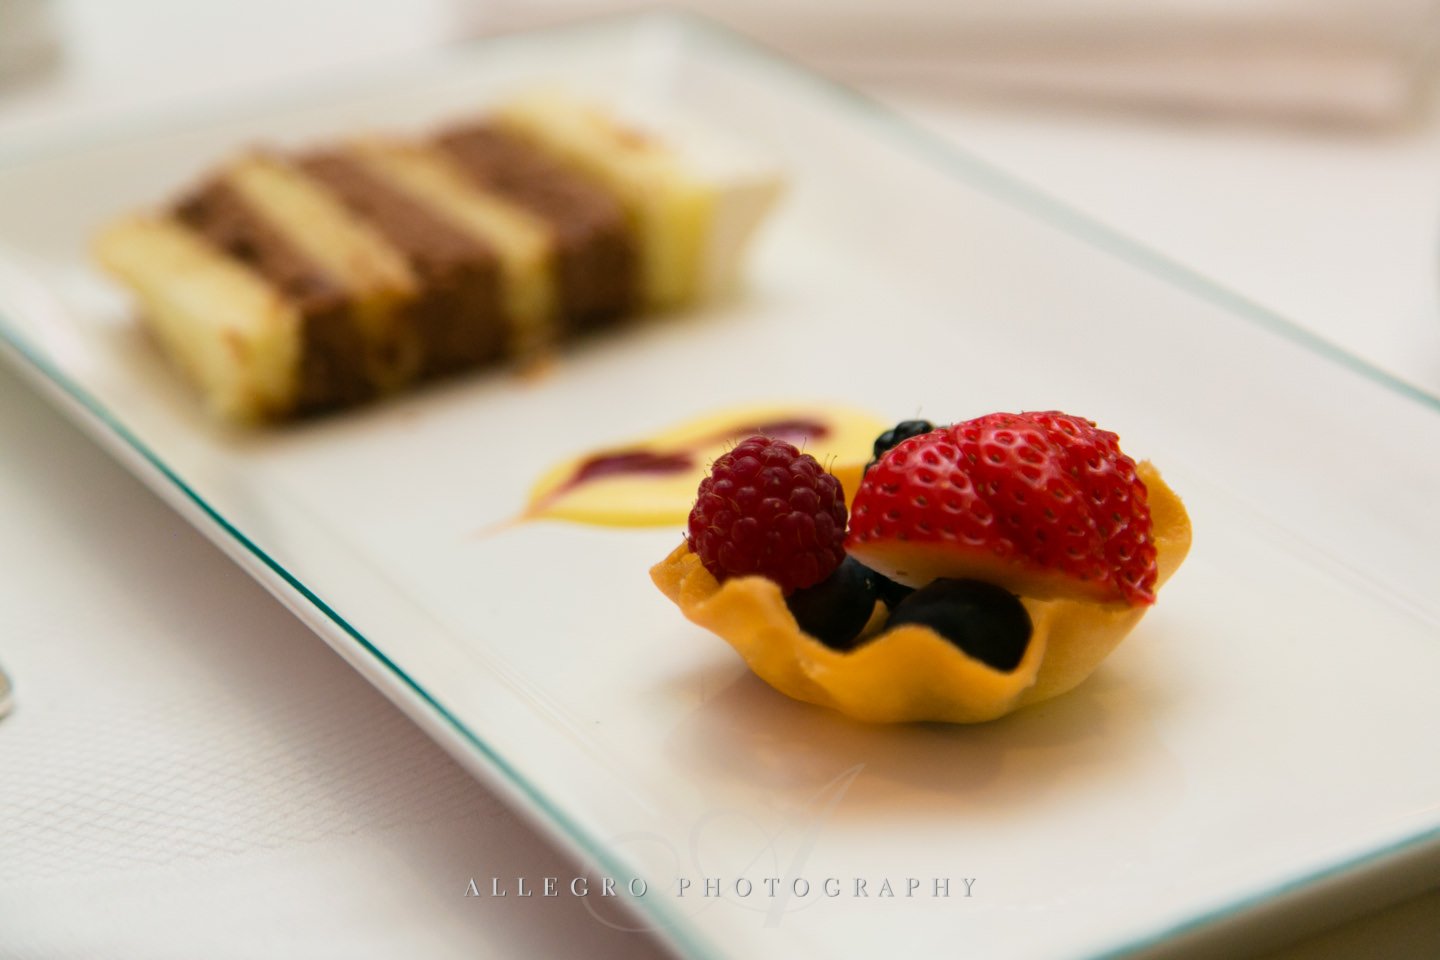 dessert plate for guests- cake and fruit tart treat- by allegro photography